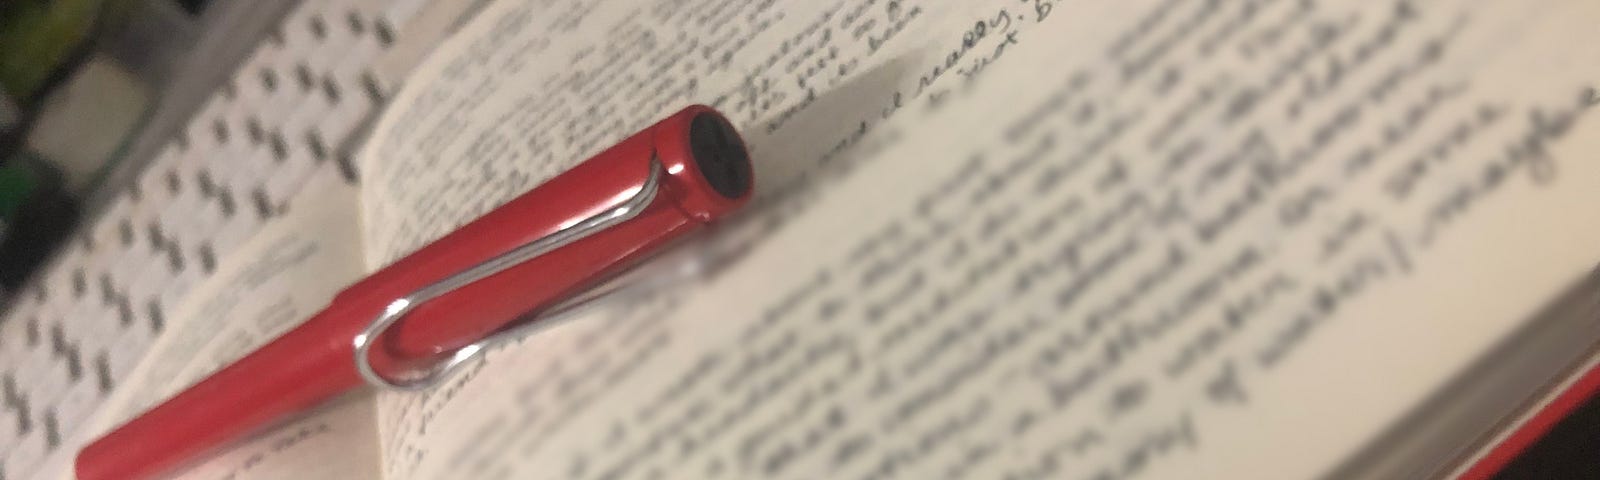 image of a journal open, with writing blurred on the page and a red fountain pen sitting on top.